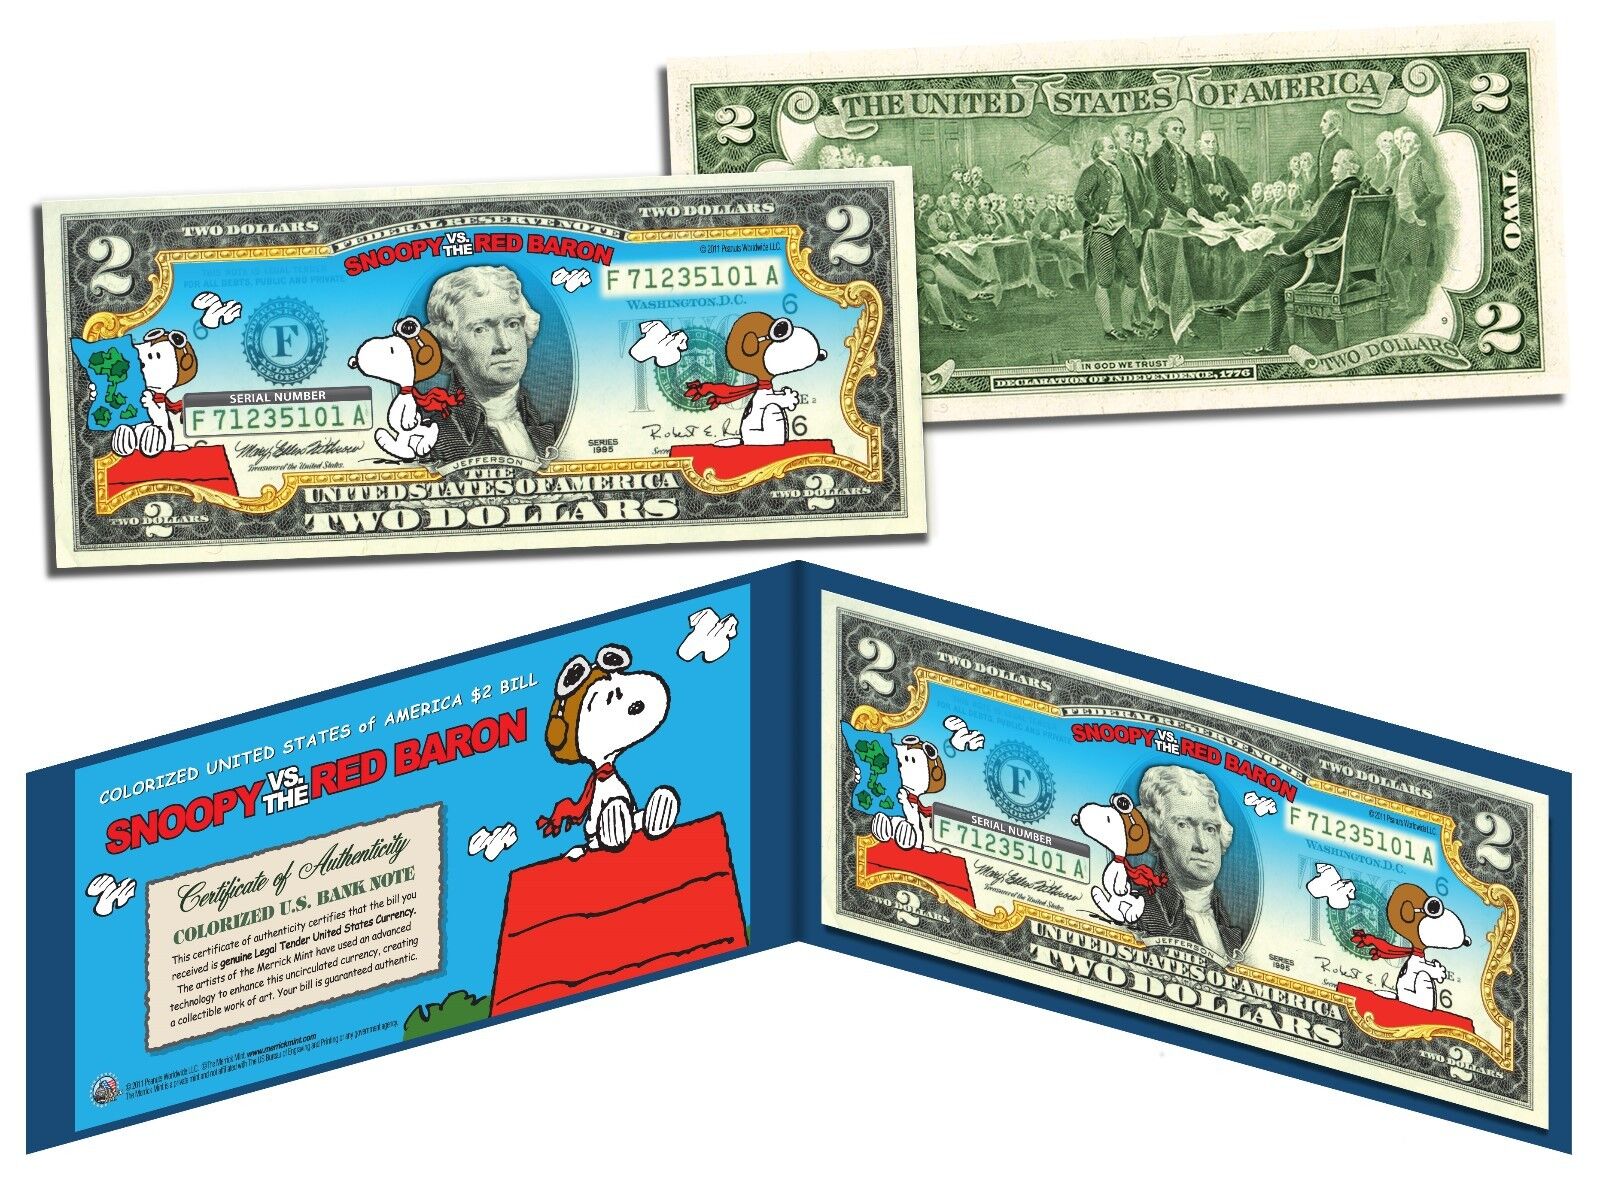 PEANUTS *SNOOPY vs. RED BARON* Legal Tender U.S. $2 Bill *OFFICIALLY LICENSED*